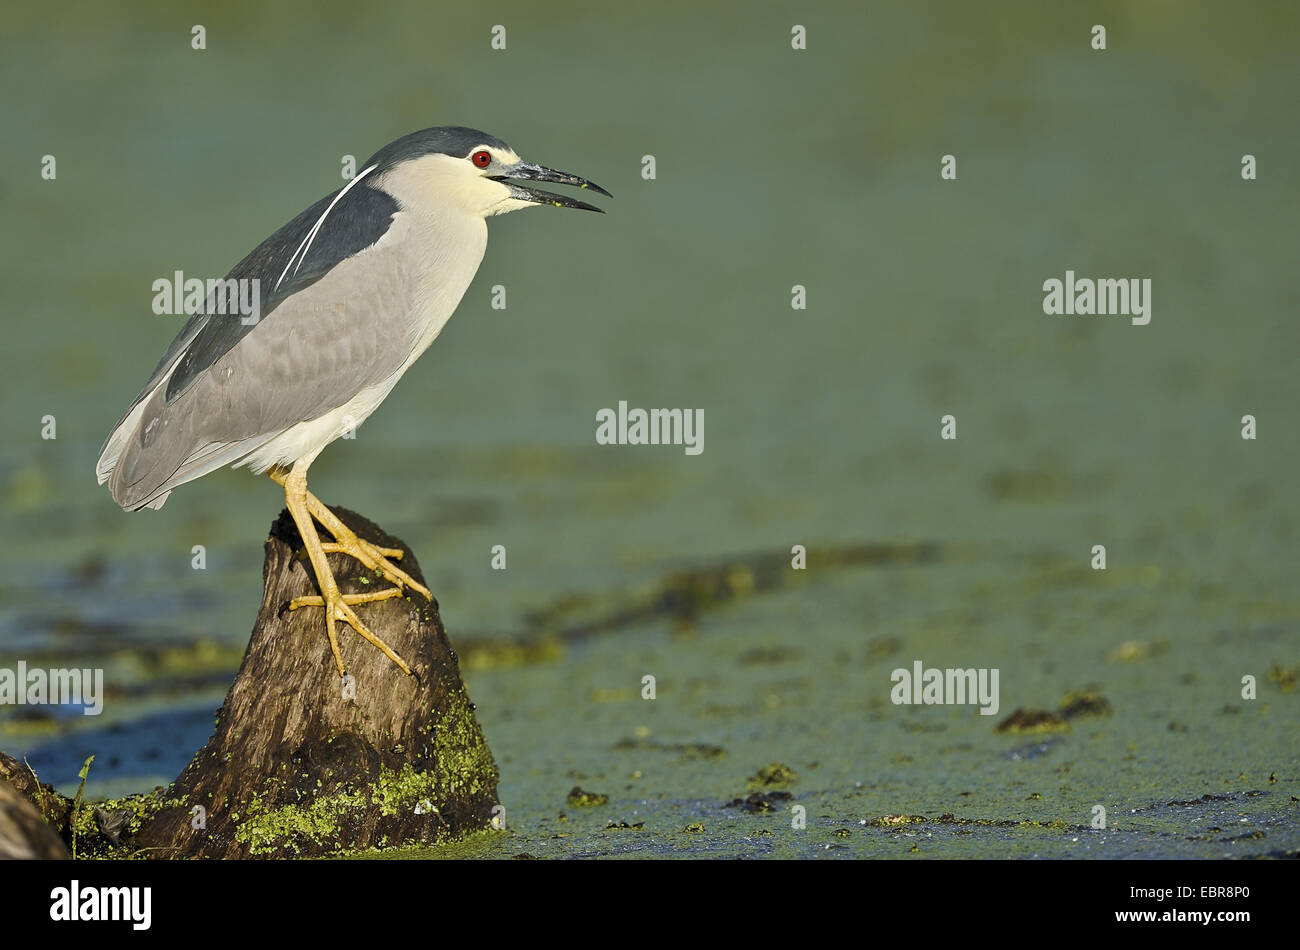 black-crowned night heron (Nycticorax nycticorax), sittin on a tree snag at a water calling, USA, Florida, Everglades National Park Stock Photo